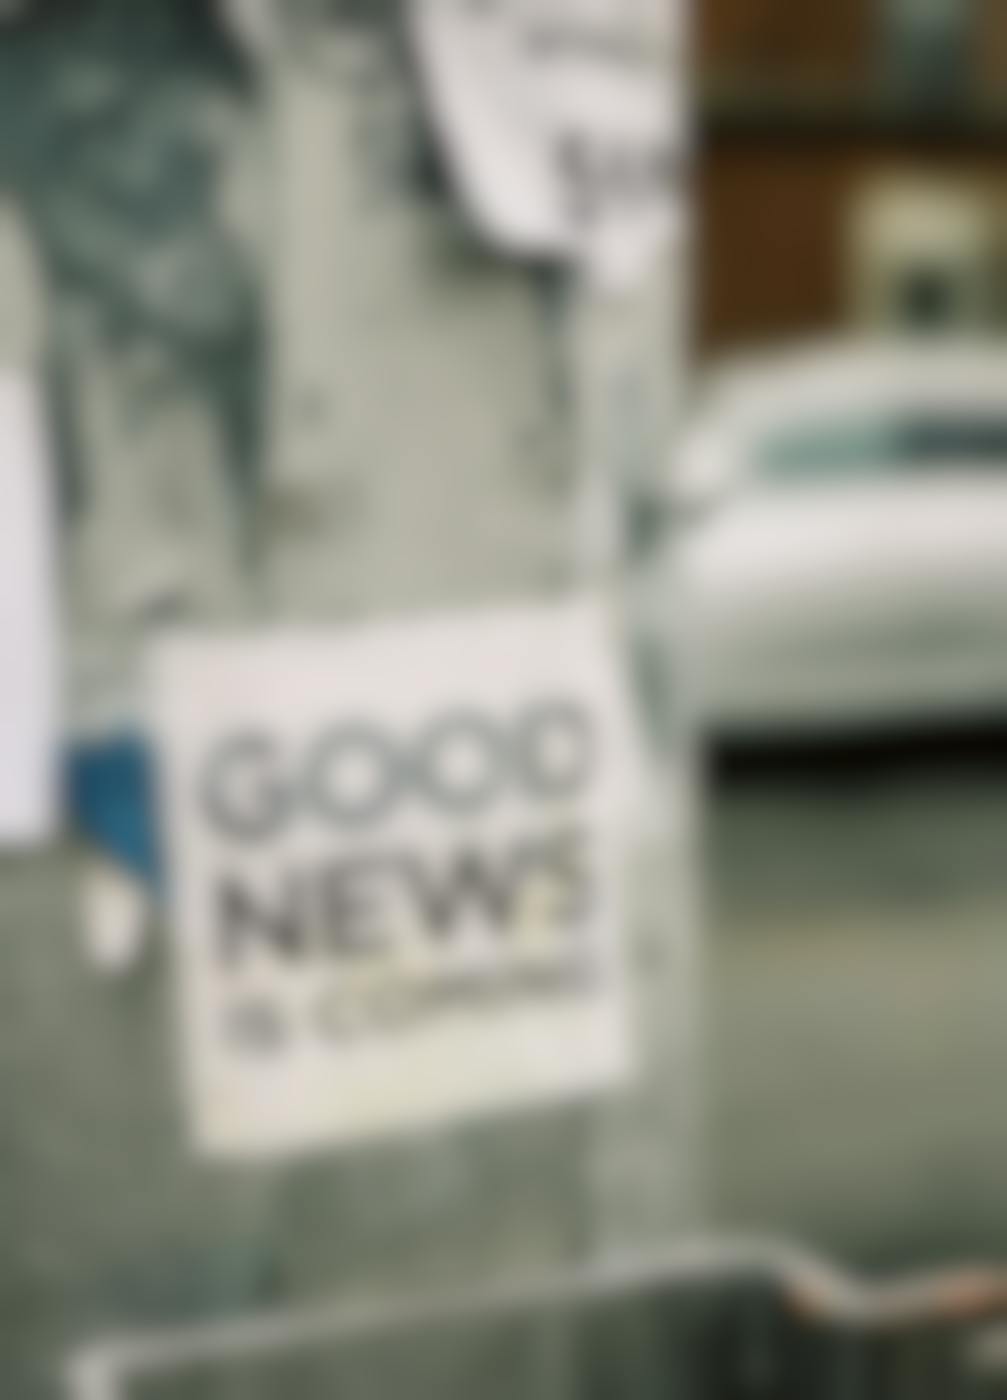 A poster on a phone pole reading Good News Is Coming